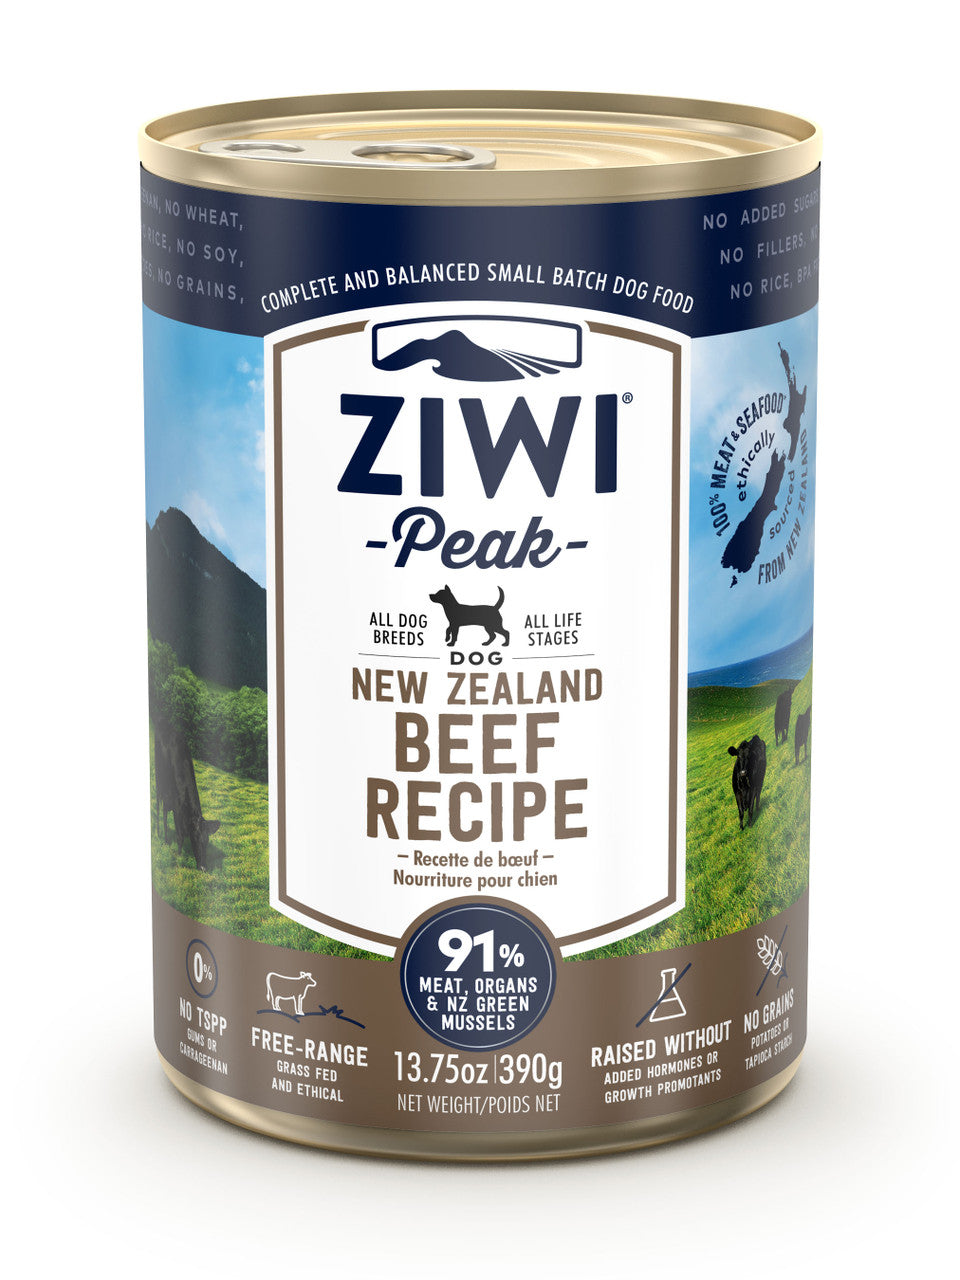 Your Whole Dog's ZIWI Peak Beef Recipe for Dogs (cans)